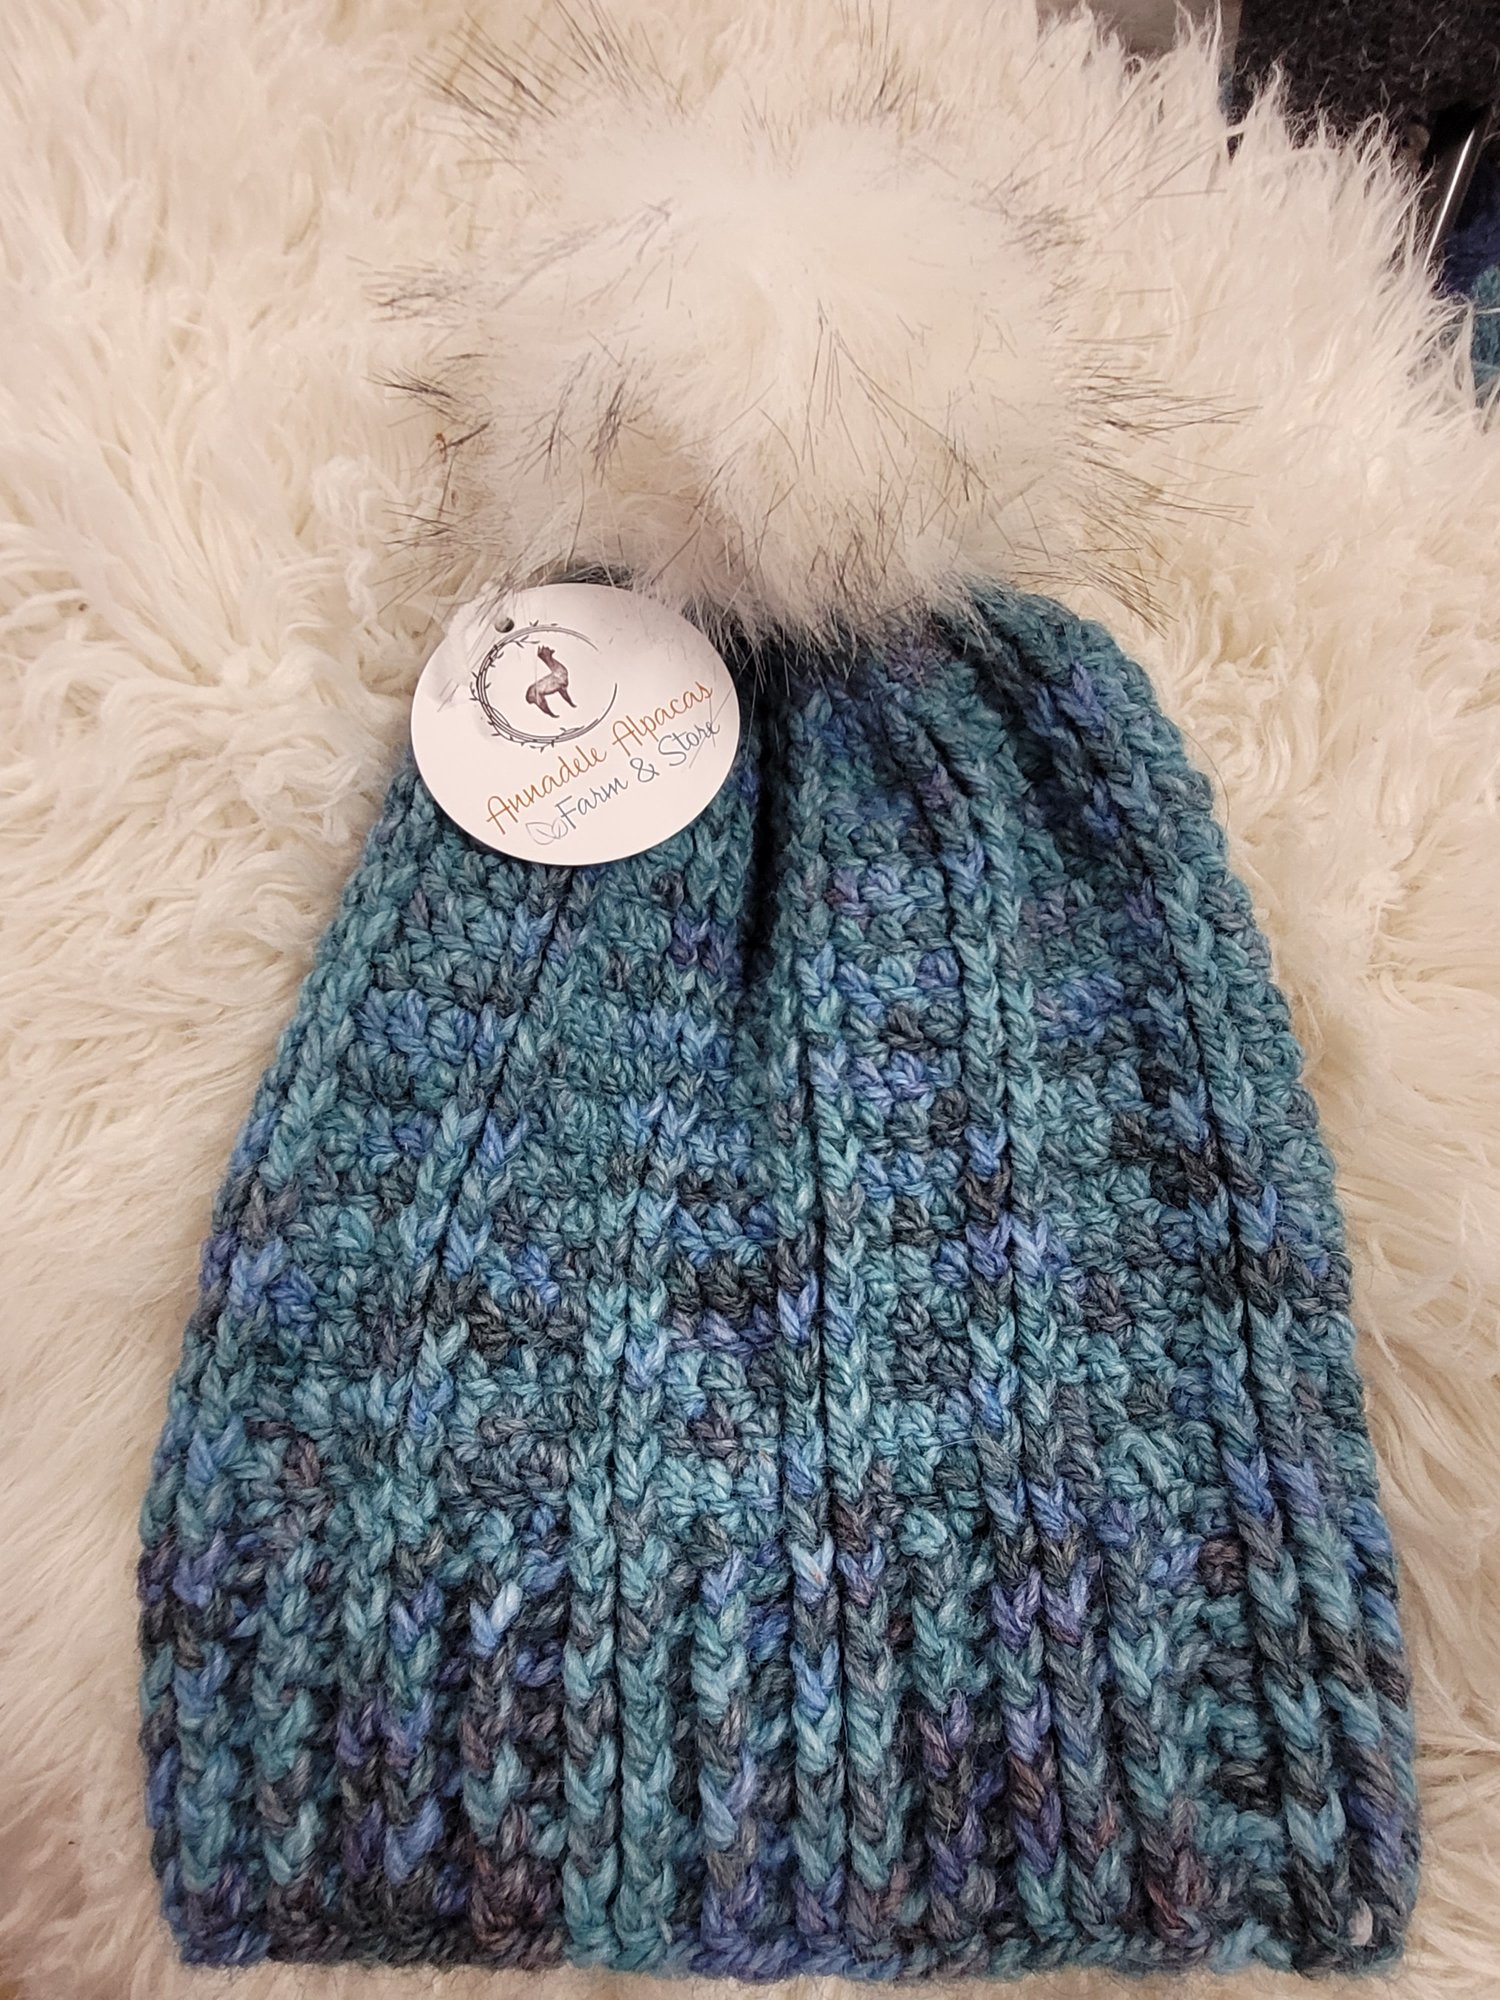 A Free Pattern: The perfect alpaca hat for cold winter nights